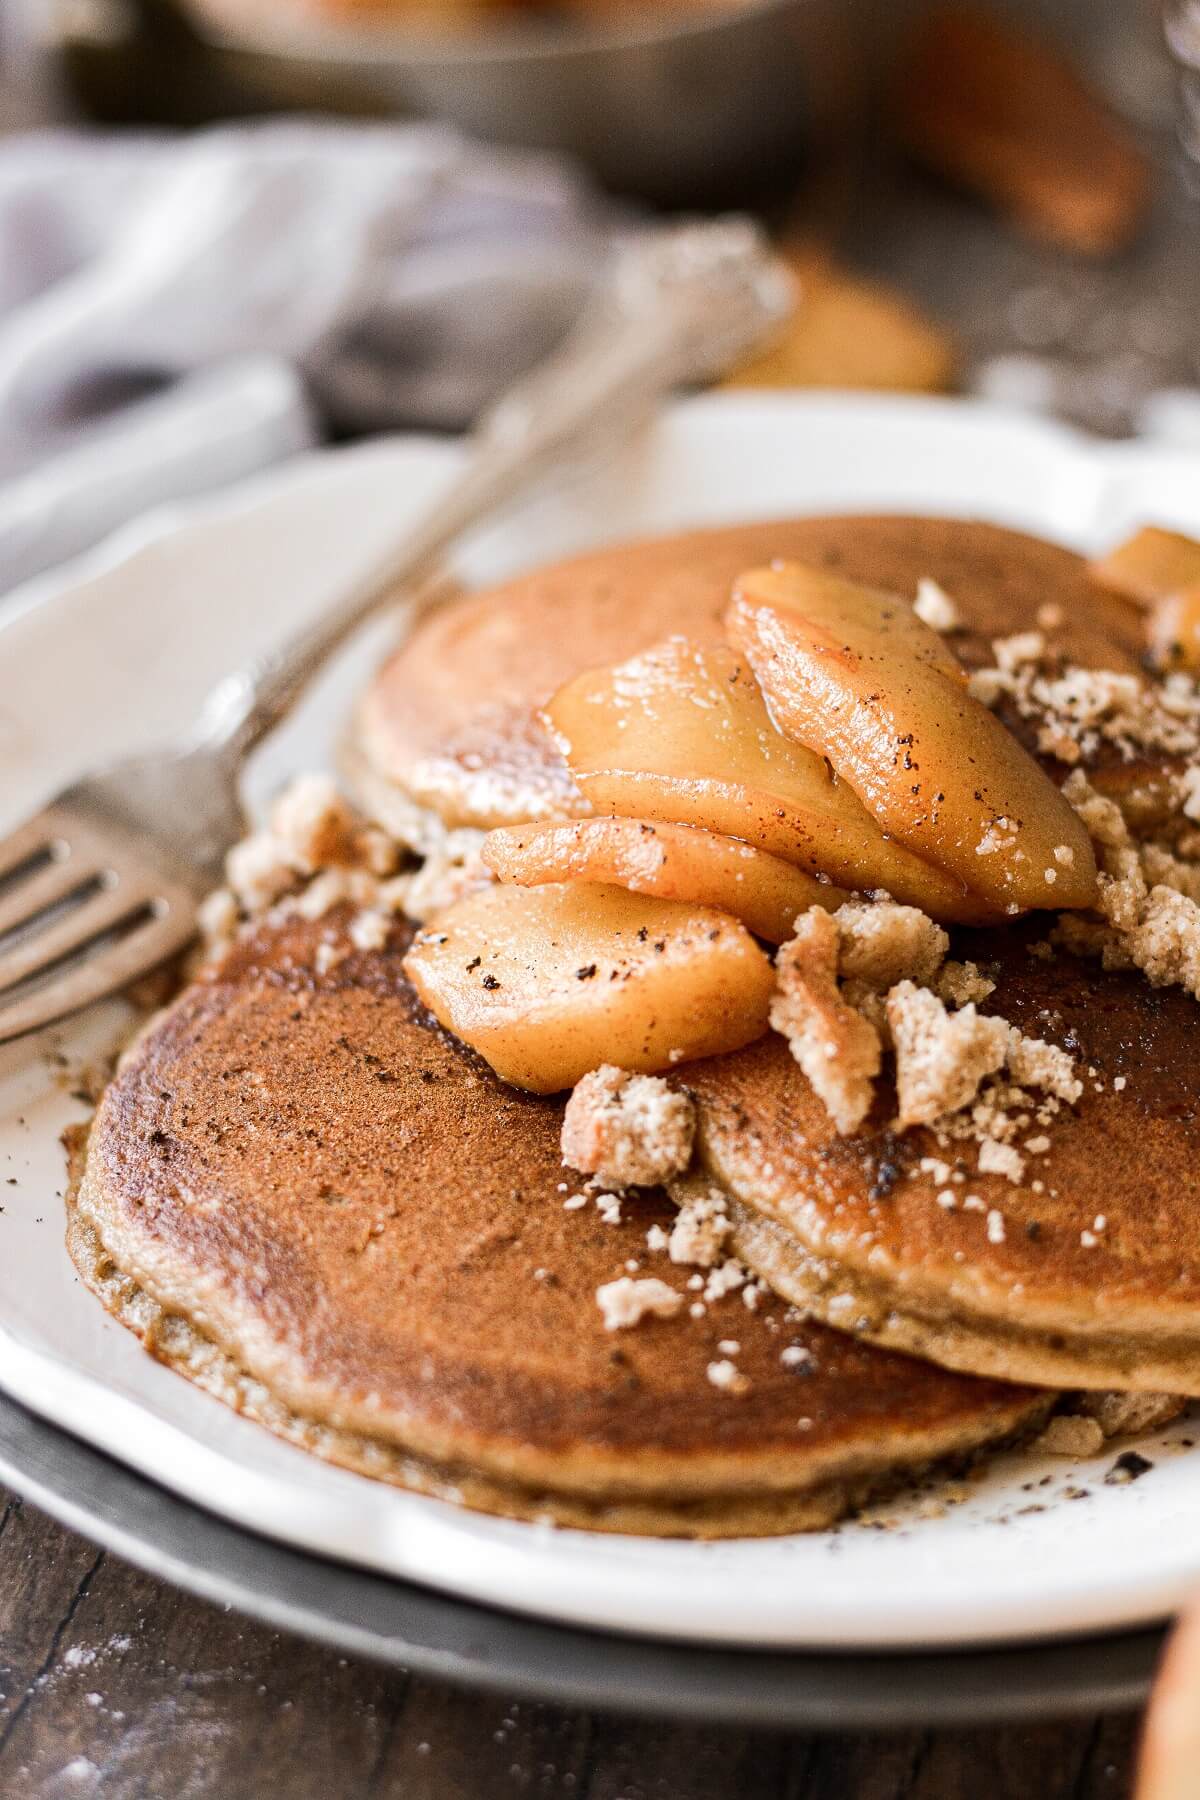 Apple cider pancakes topped with cinnamon apples.